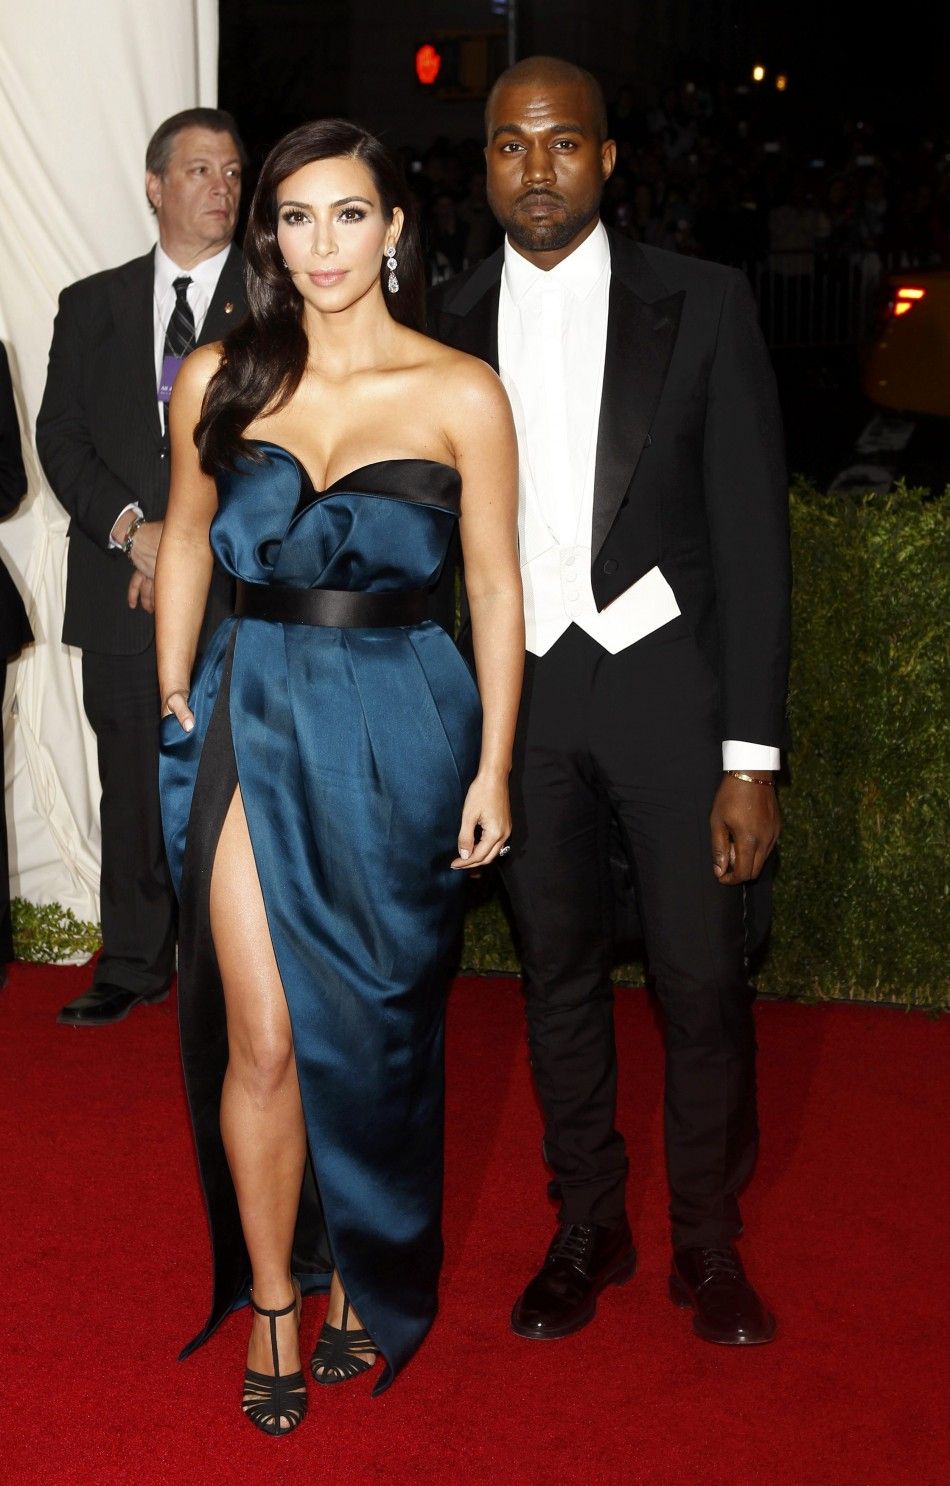 Kim  Kardashian and Kanye West arrive at the Metropolitan Museum of Art Costume Institute Gala Benefit celebrating the opening of quotCharles James Beyond Fashionquot in Upper Manhattan, New York May 5, 2014. REUTERSCarlo Allegri   